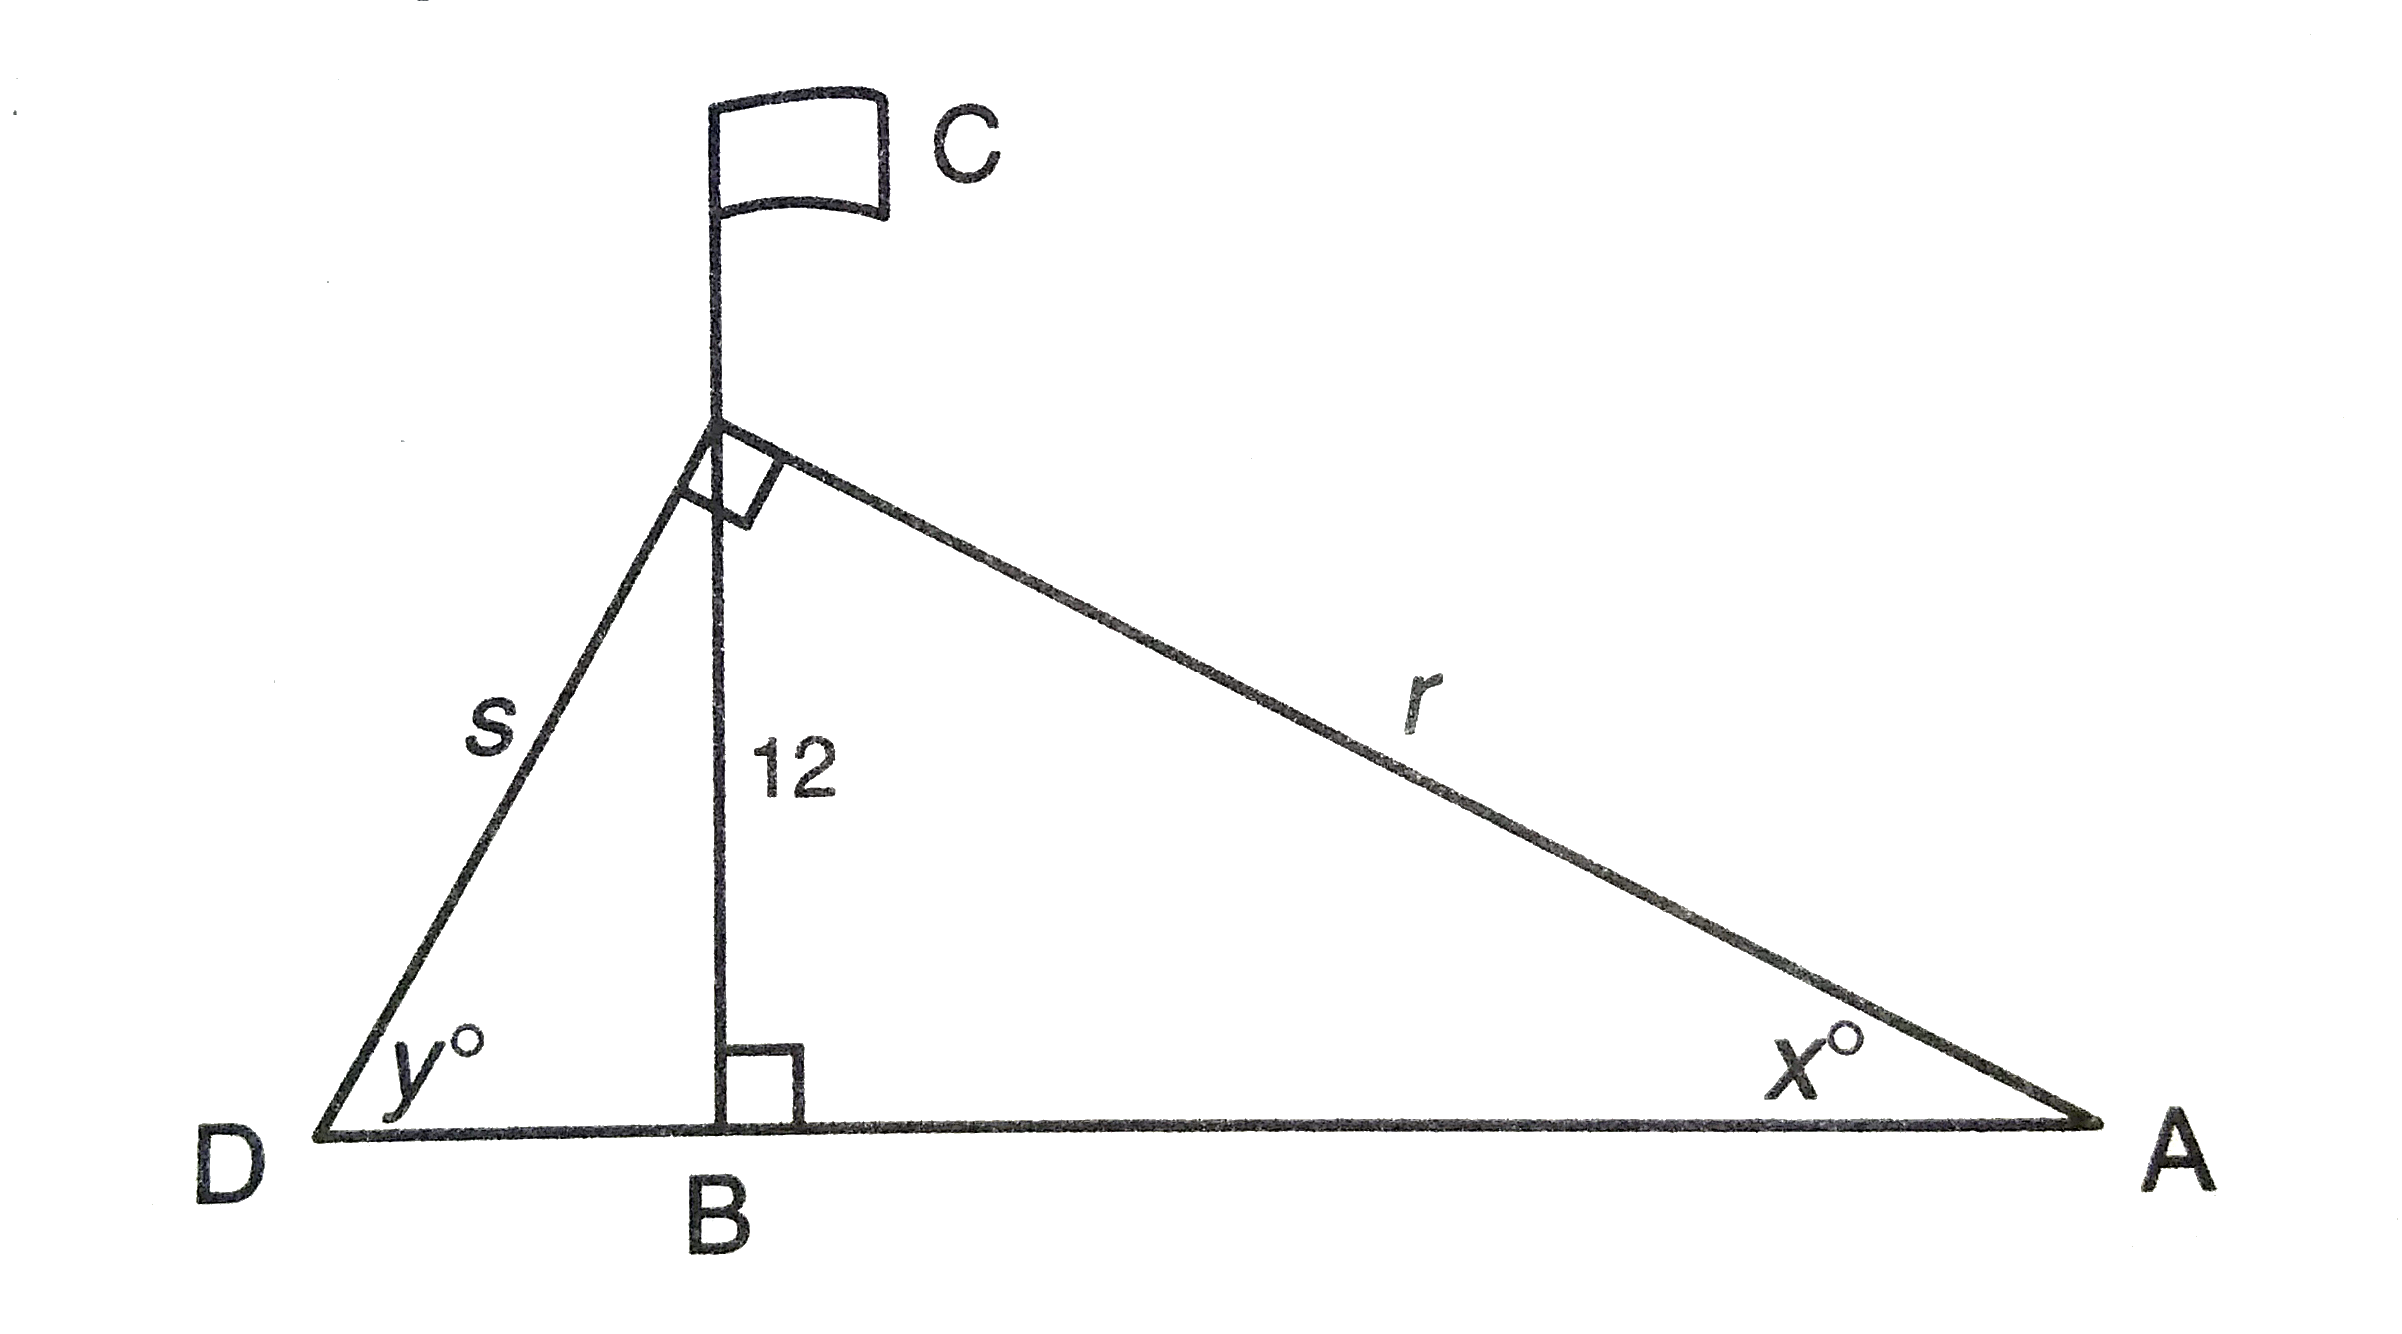 For Question 4 and 5 refer to the diagram      A flagpole that stands on level ground. Two cables, r and s, are attached to the pole at a point 12 feet above the ground and form a right angle with each other. Cable r is attached to the ground to the ground at a point that makes tanx=0.75.   Q. What is the sum of the lengths of cables r and s?